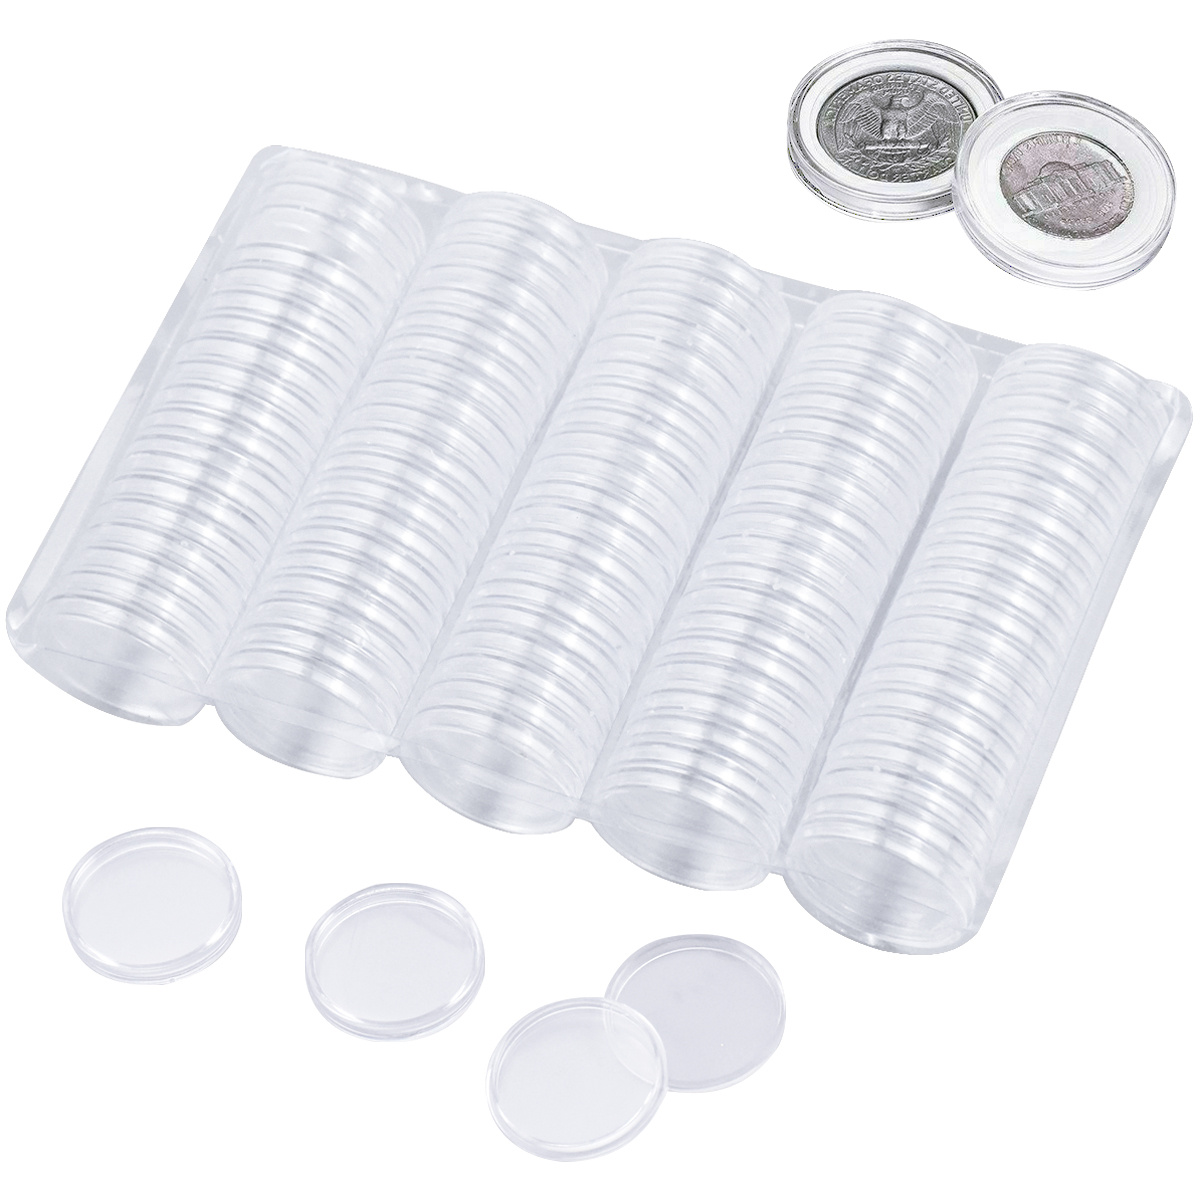 100pcs Round Plastic Coin Capsules With Storage Box - Coin Collection  Supplies, Commemorative Coin Protector - Ideal For Christmas, Halloween,  Thanksgiving Gifts